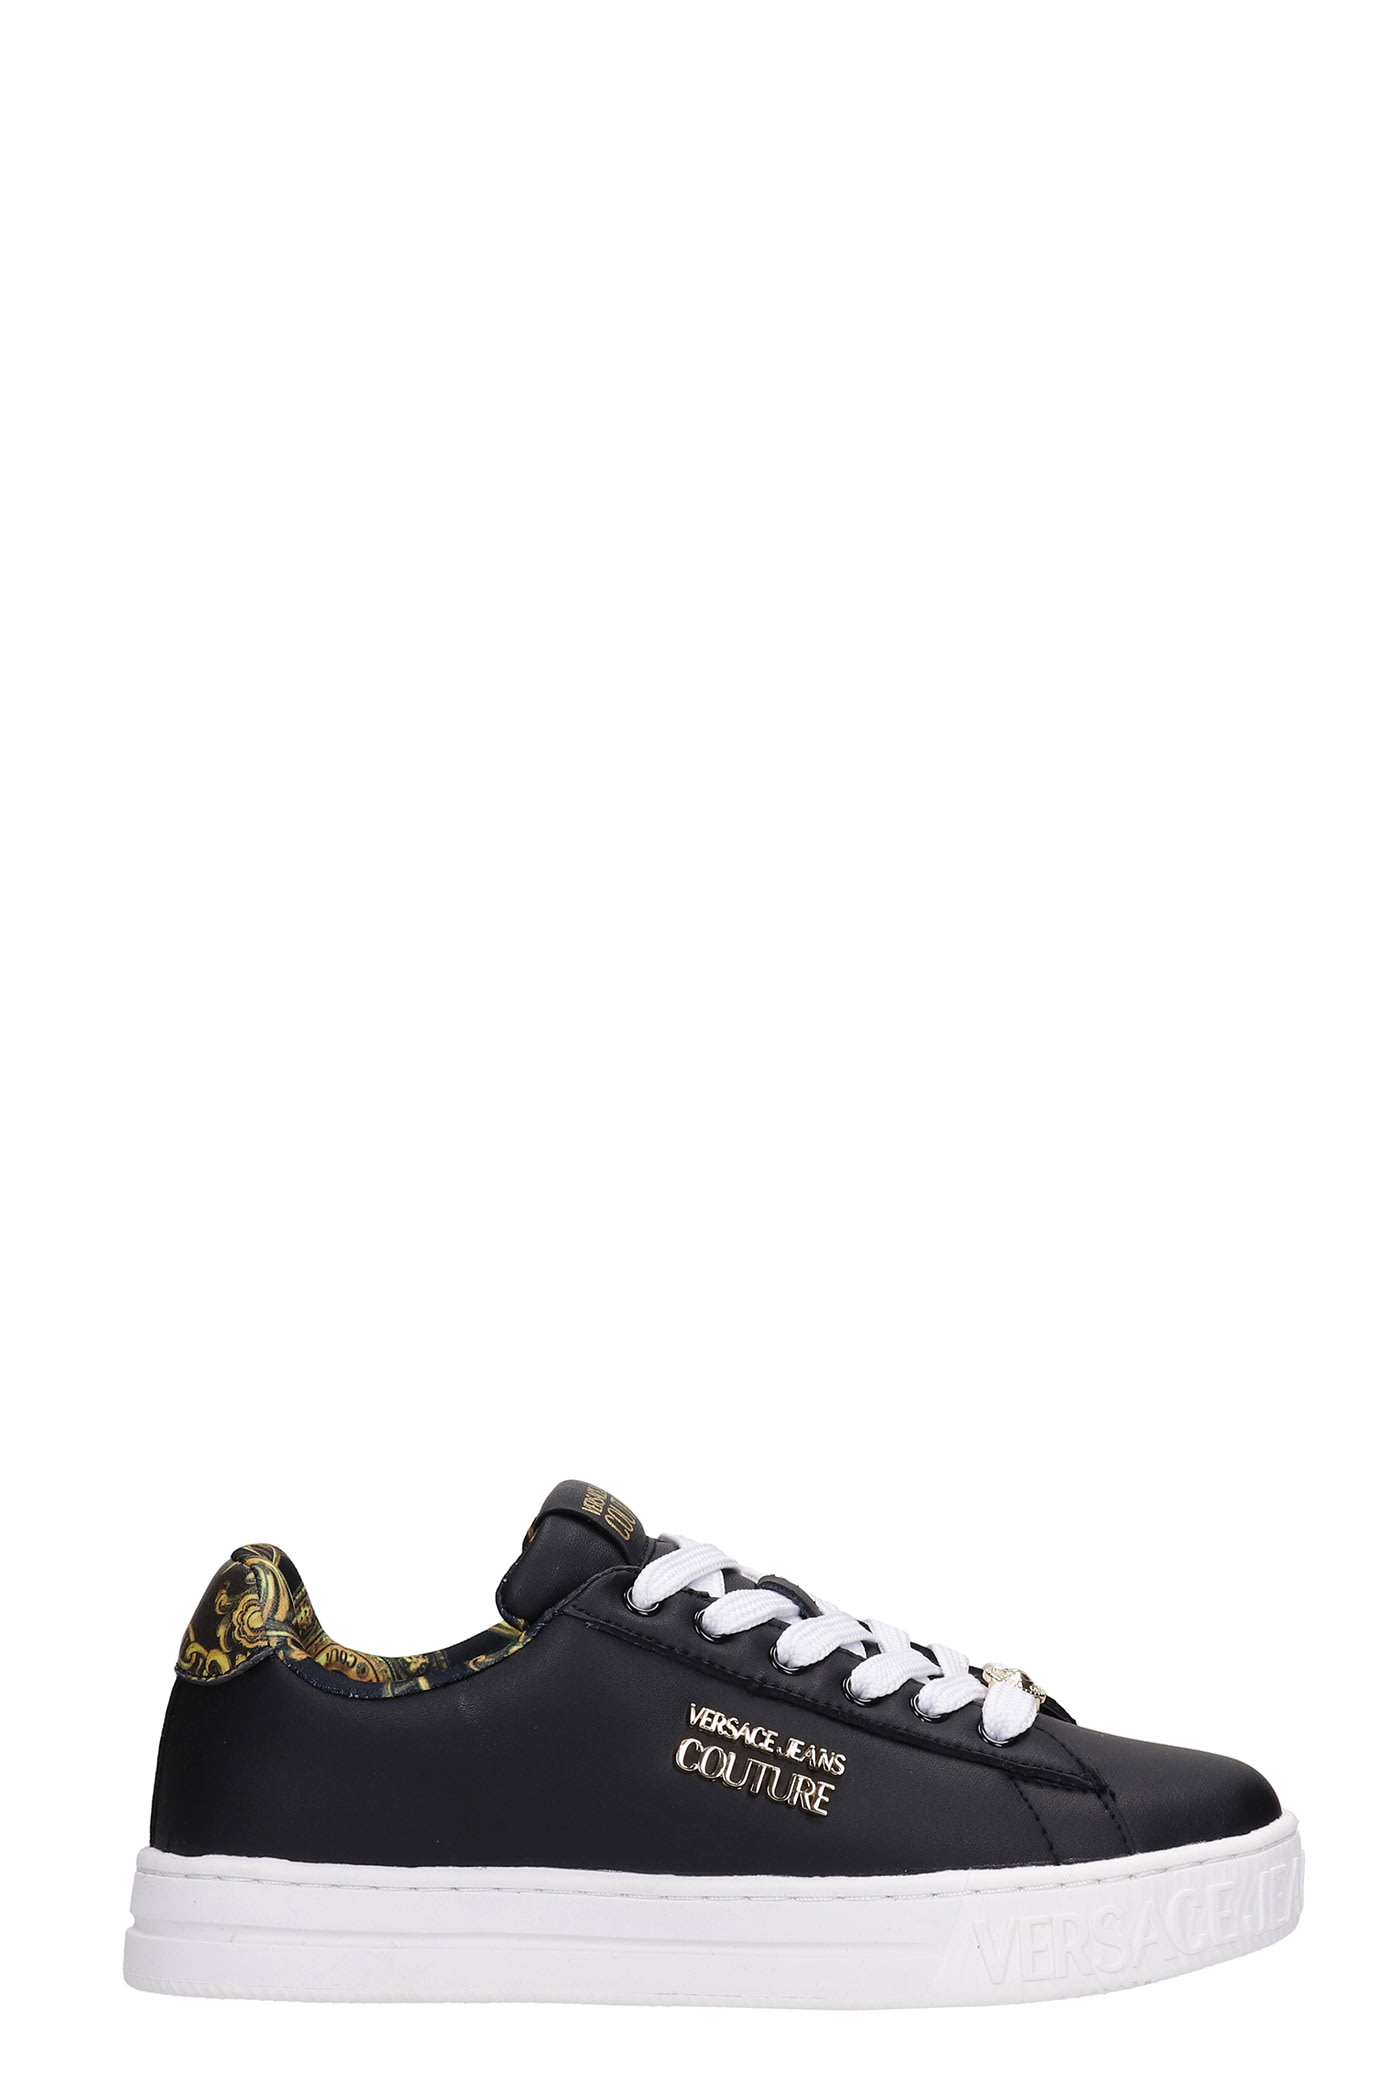 Versace Jeans Couture Sneakers In Black Faux Leather